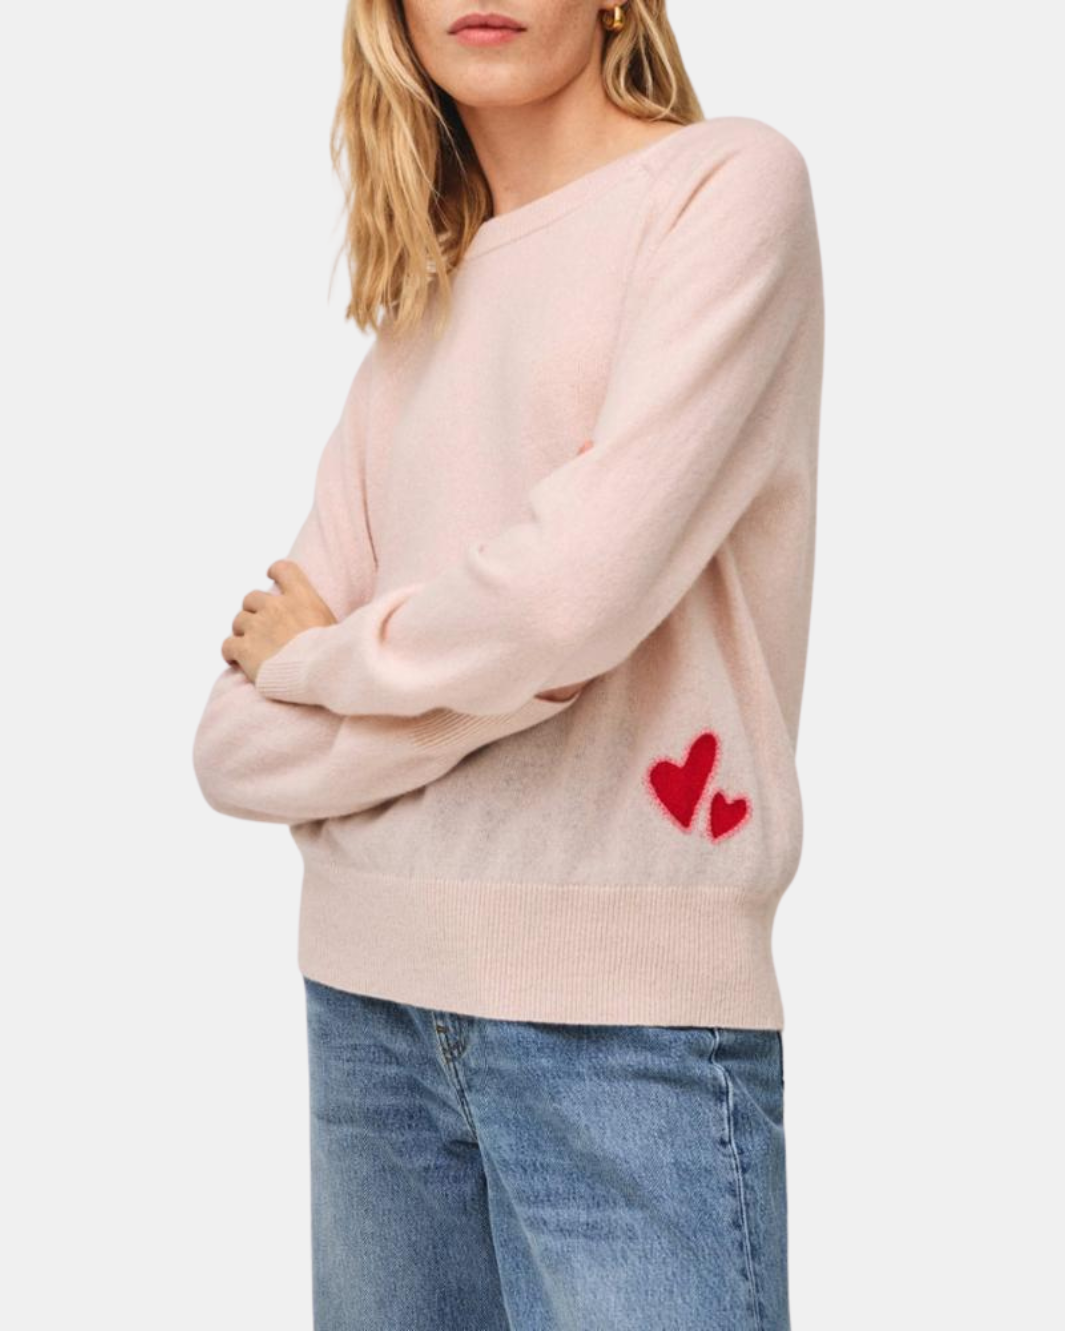 CASHMERE EMBROIDERED HEART SWEATSHIRT IN PINK SAND COMBO - Romi Boutique